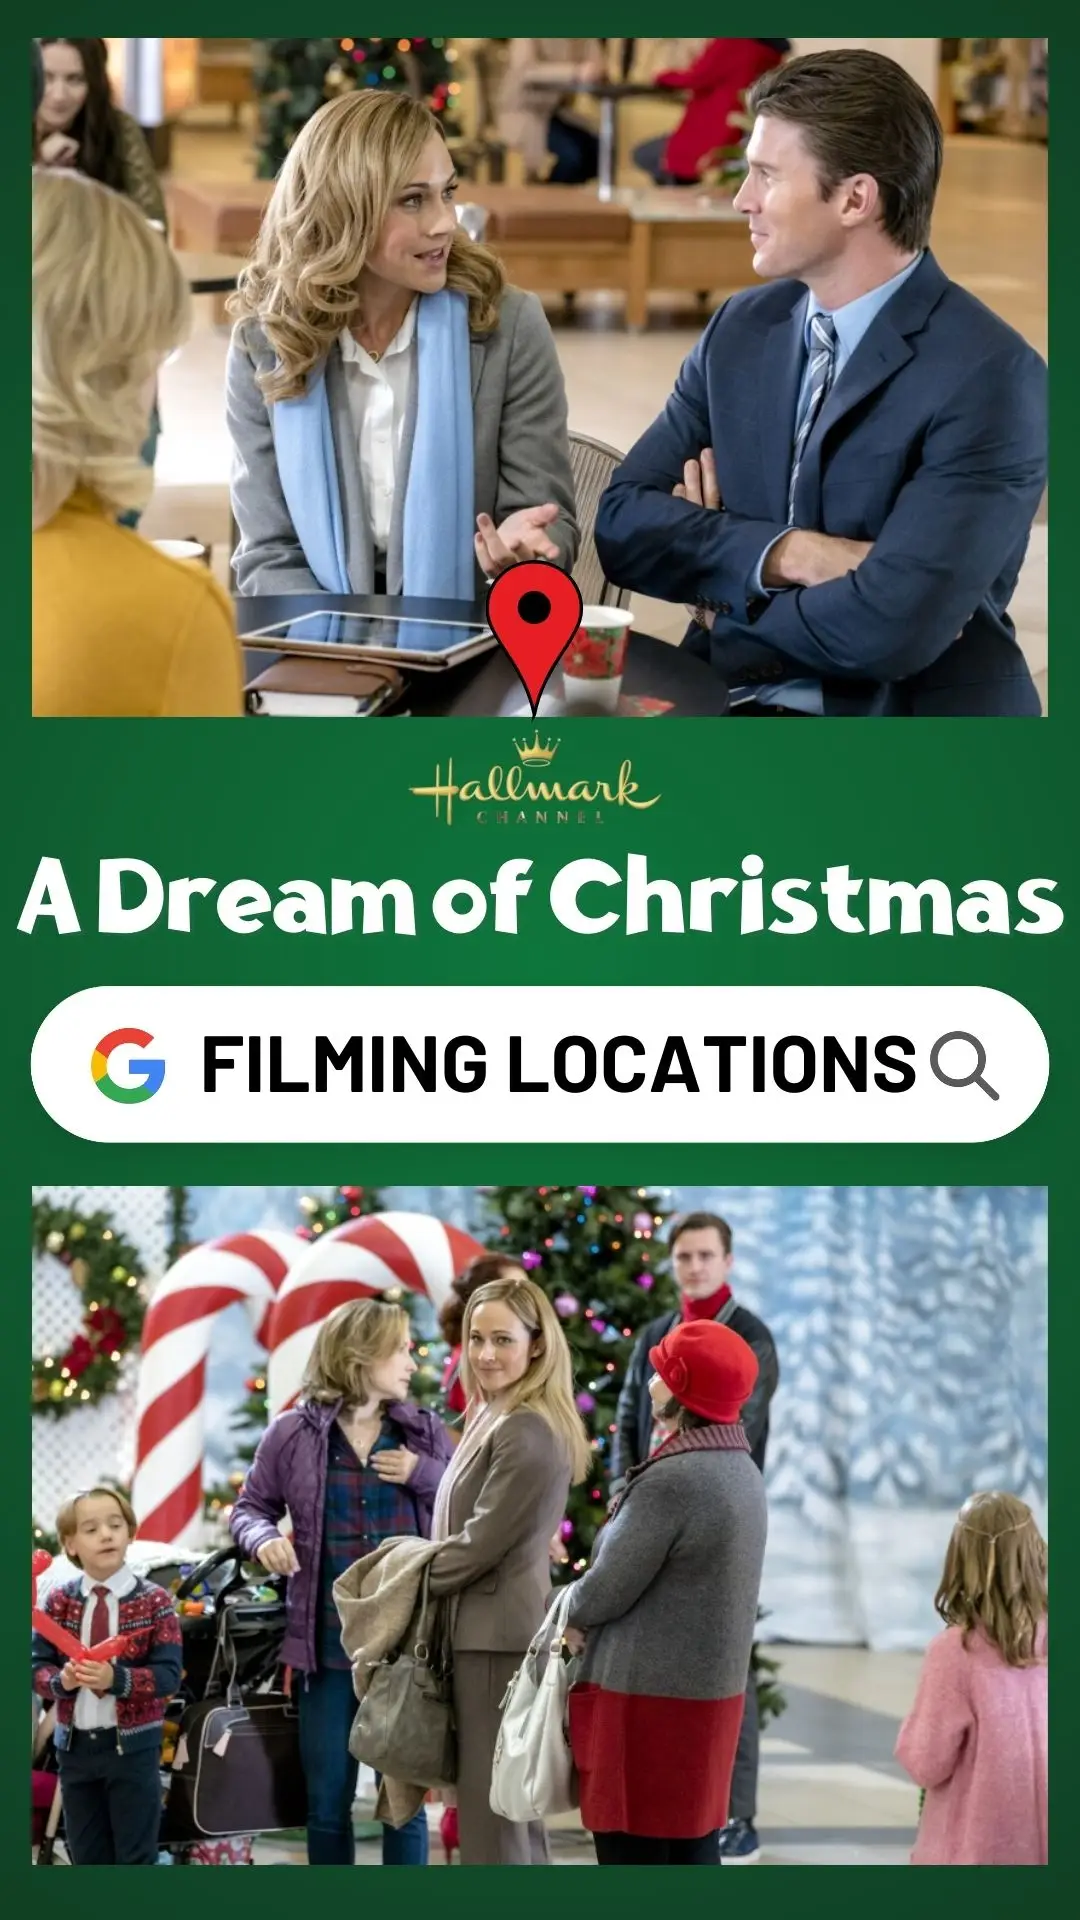 A Dream of Christmas Filming Locations